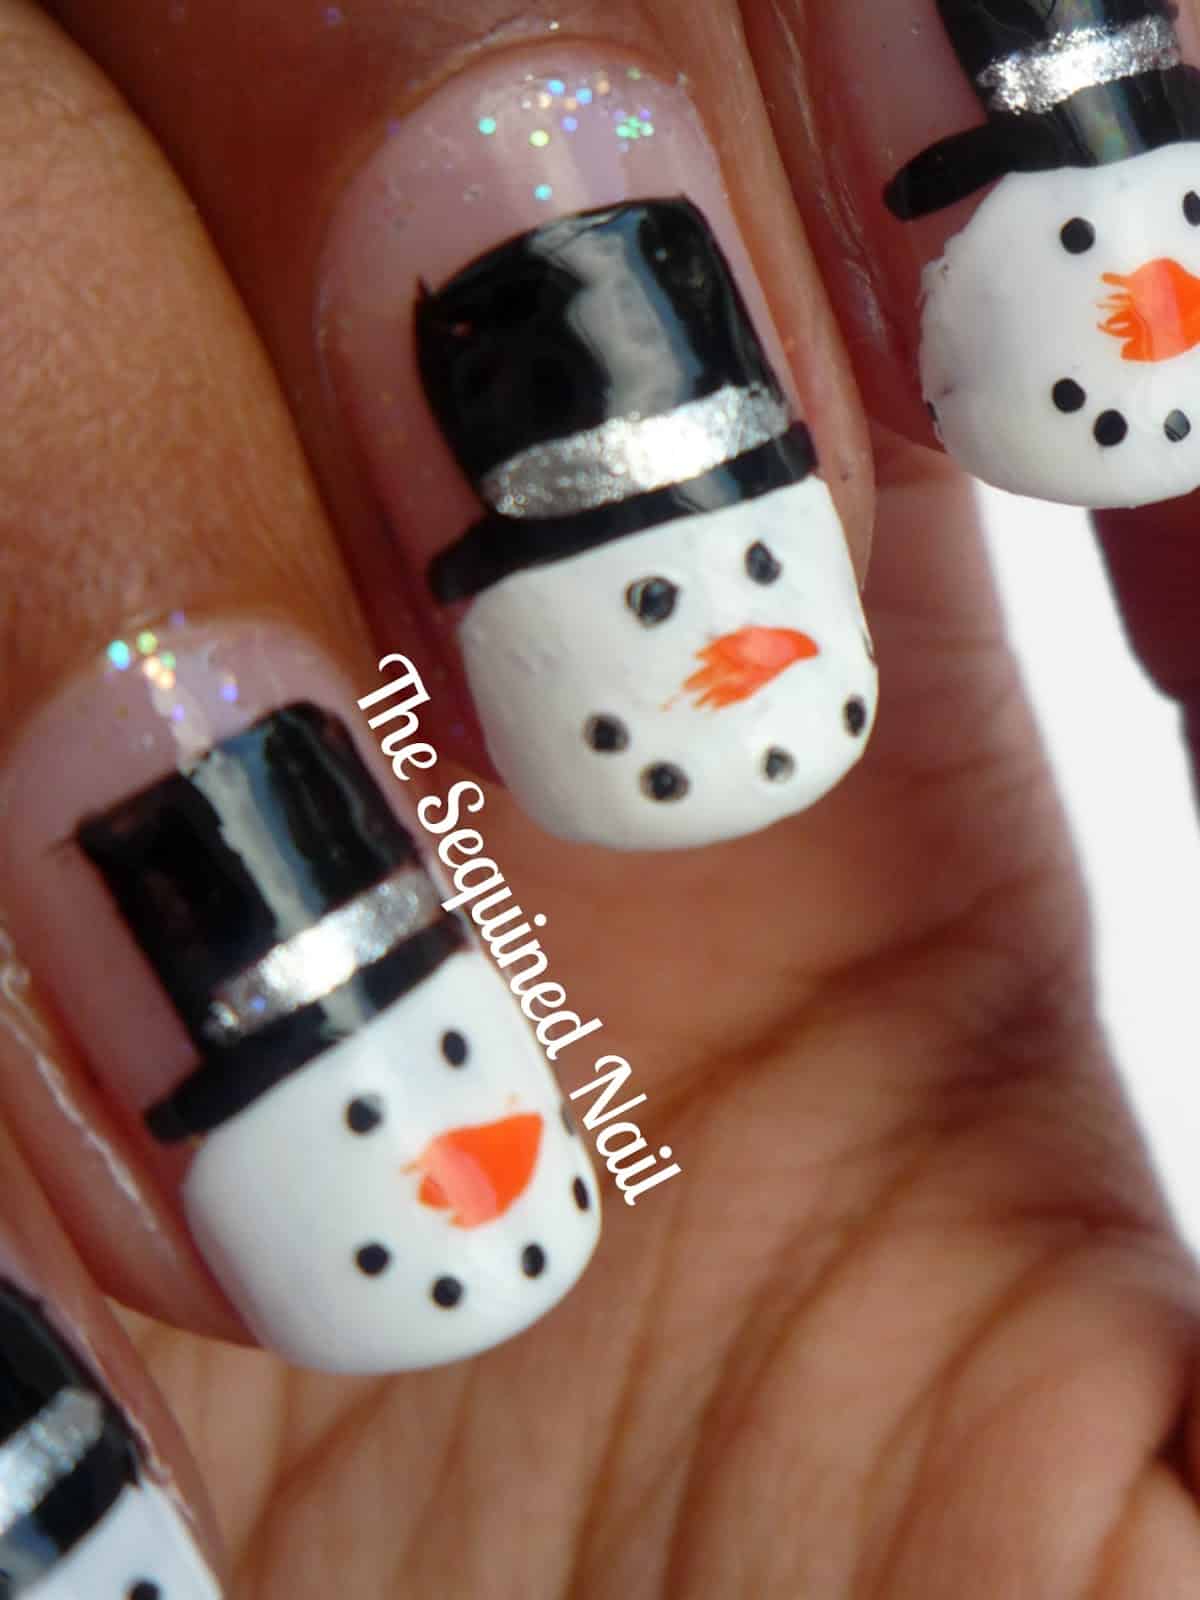 Frosty the snowman nails